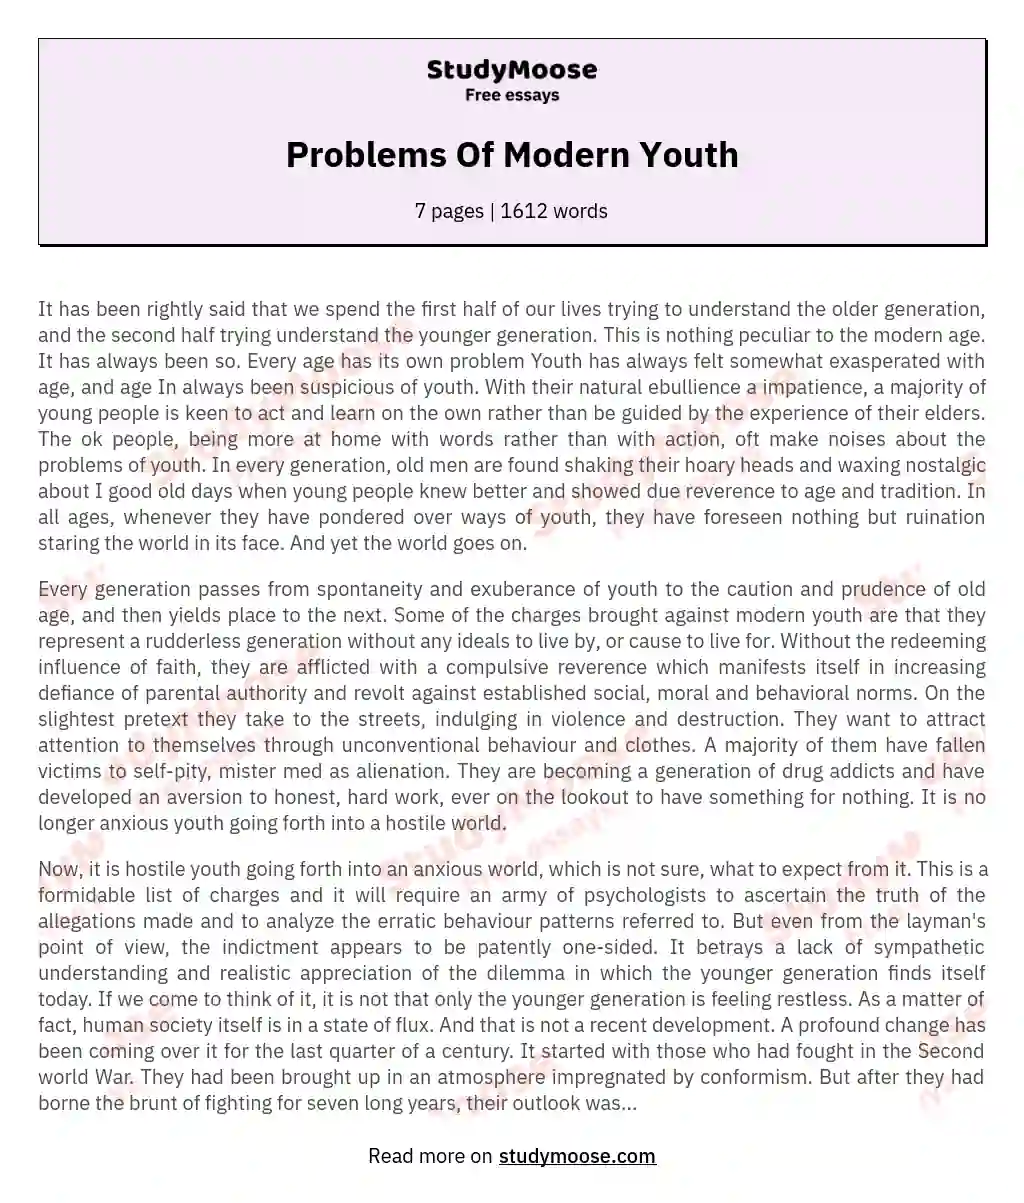 Problems Of Modern Youth essay